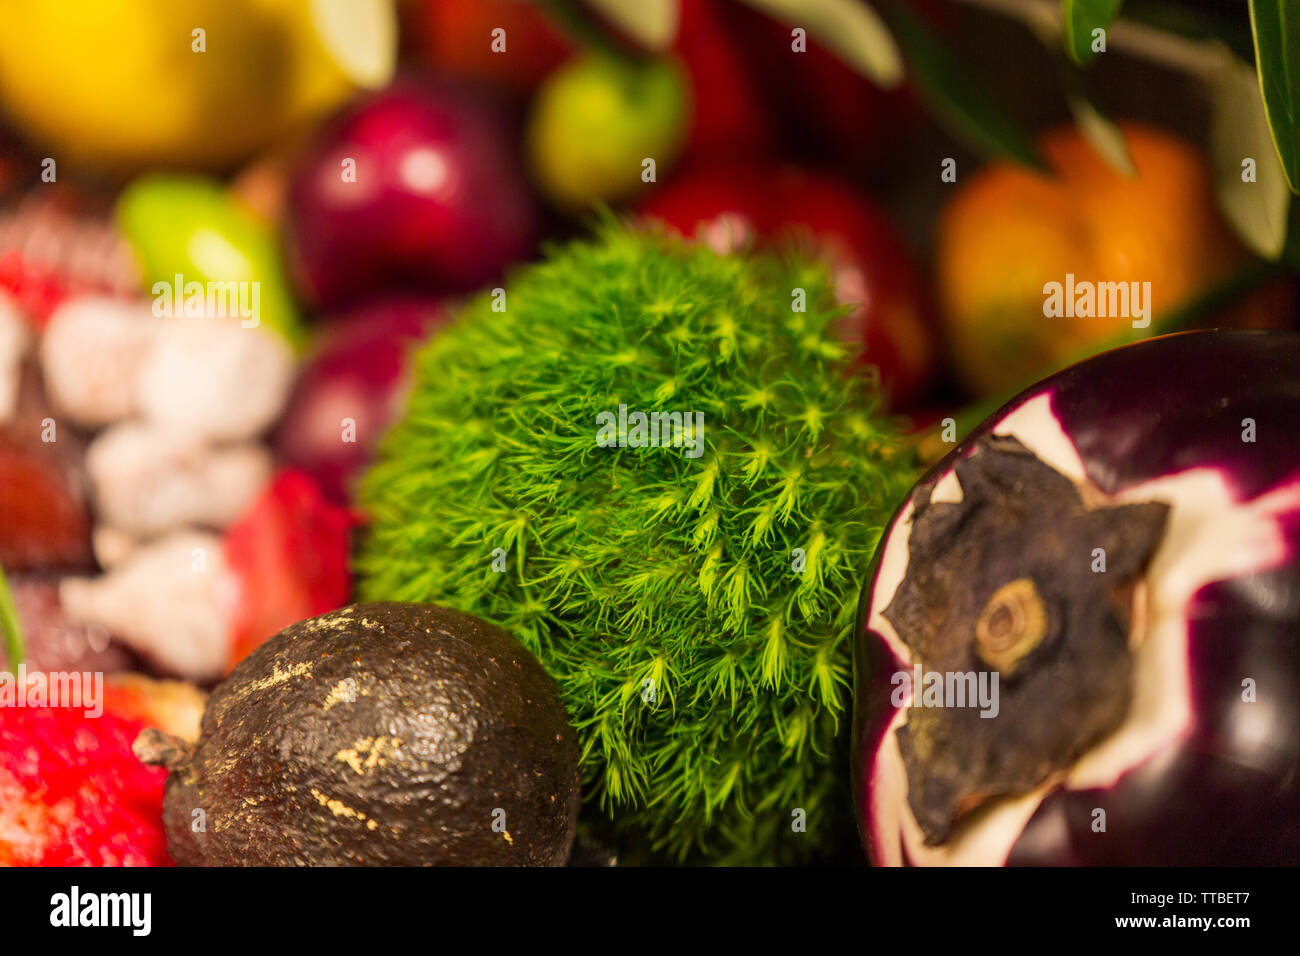 Cluse Up of seasonal food on decorated table Stock Photo